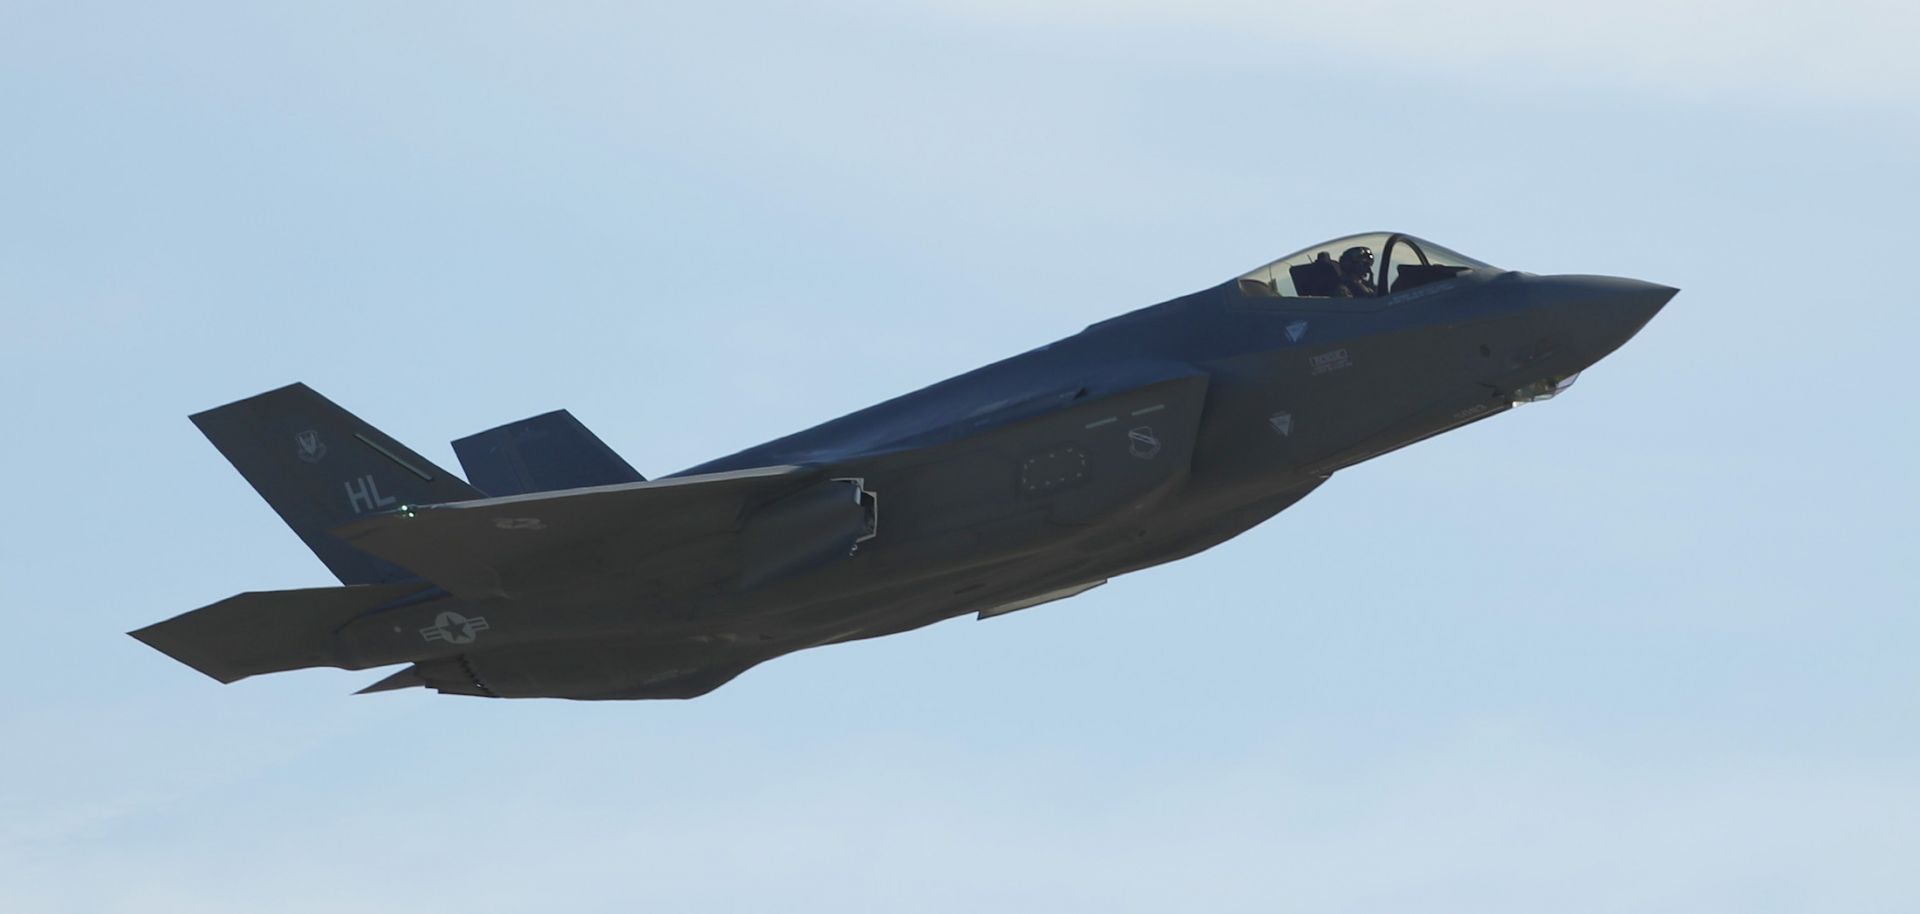 An F-35 fighter jet participates in a training mission at a U.S. military base in Ogden, Utah, on March 15, 2017. 